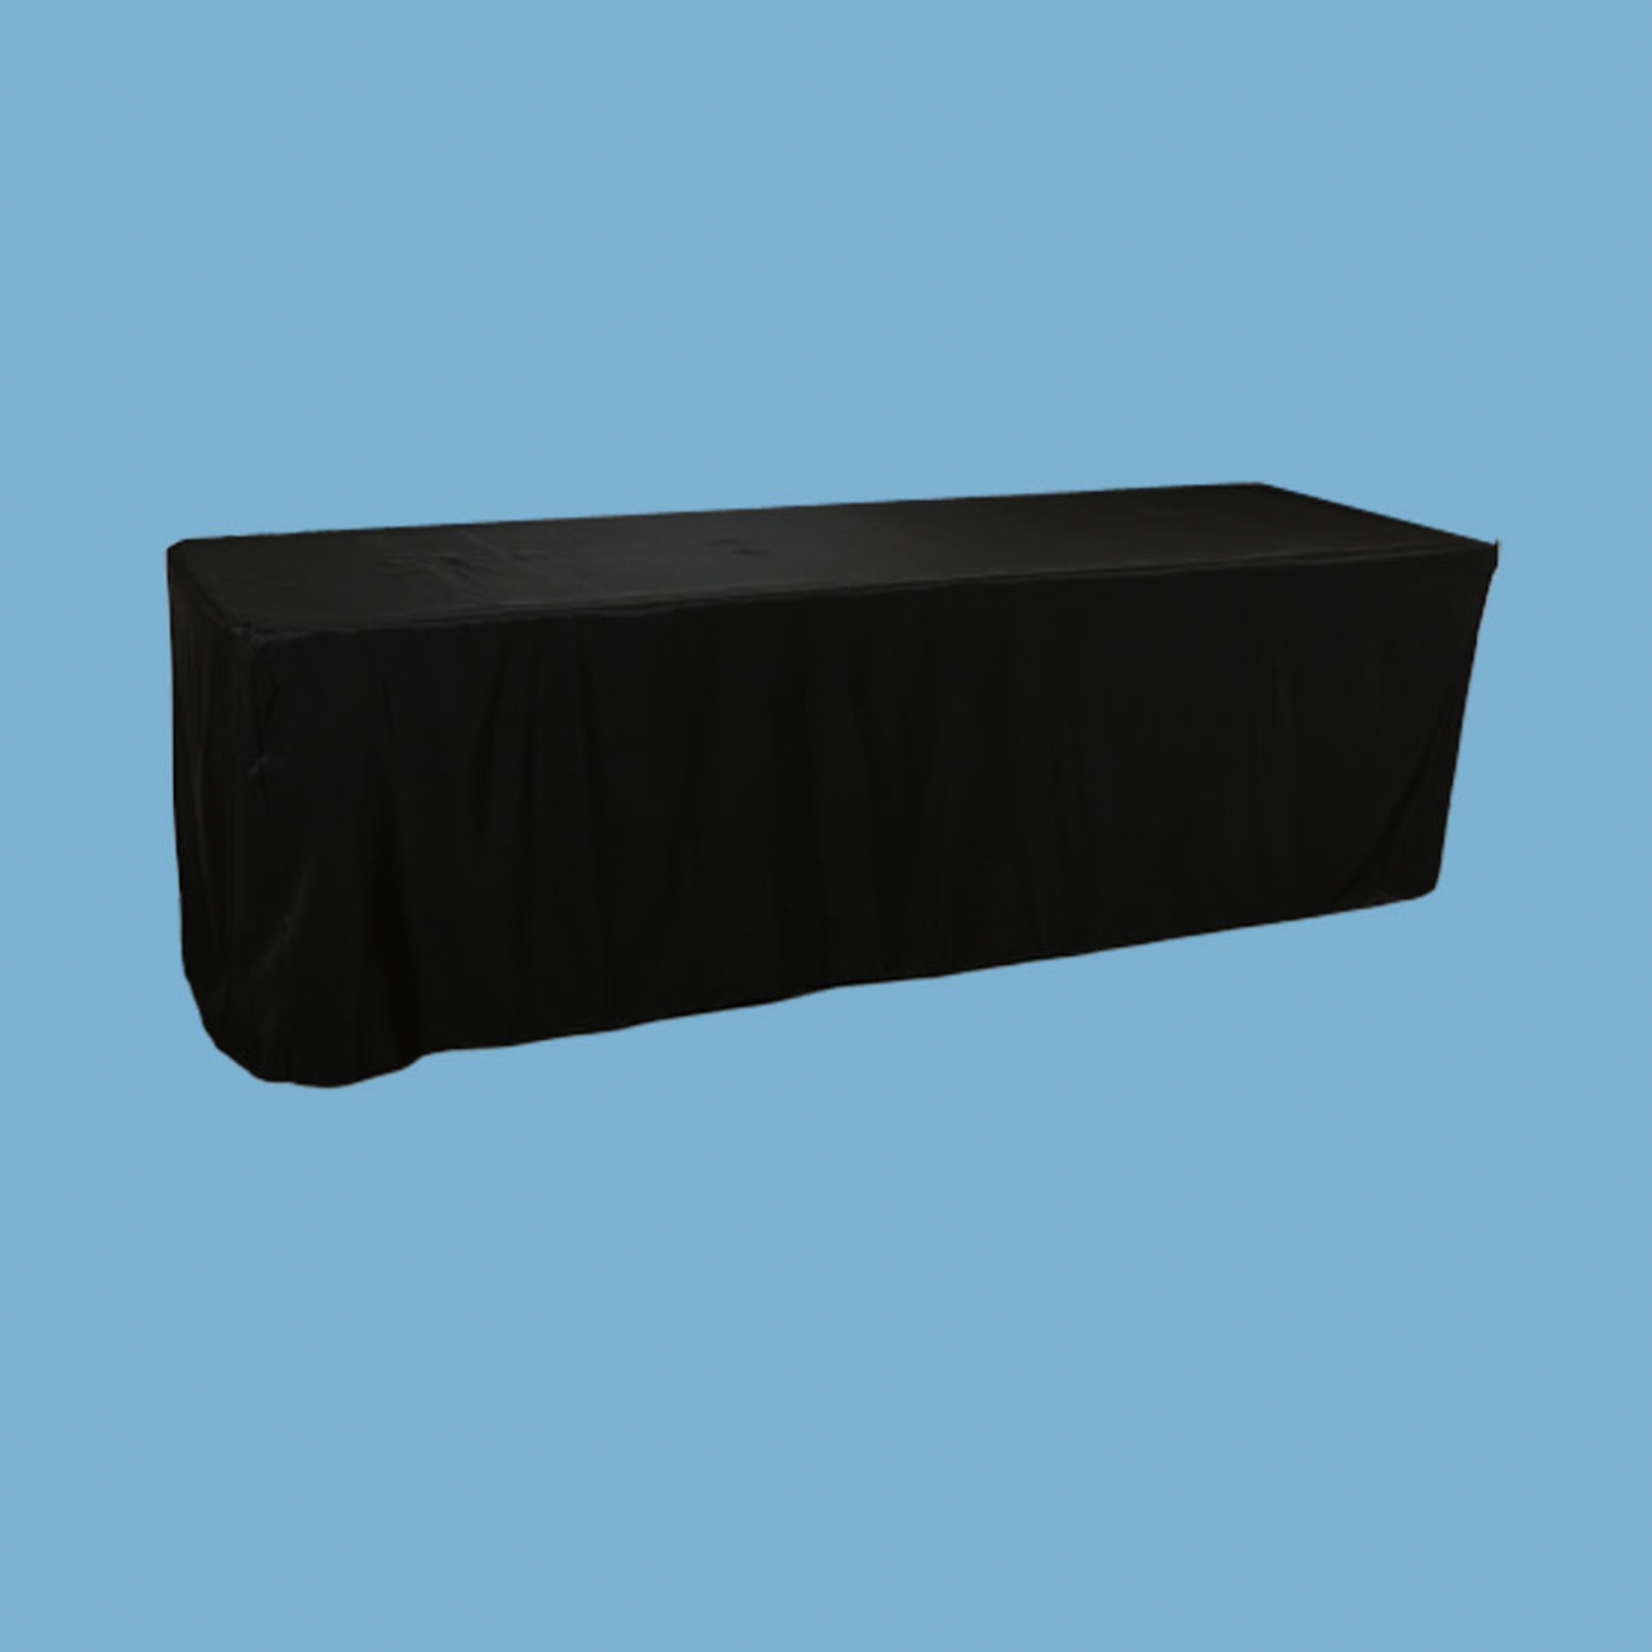 72" X 29" FITTED FULL DROP TABLECLOTH, BLACK